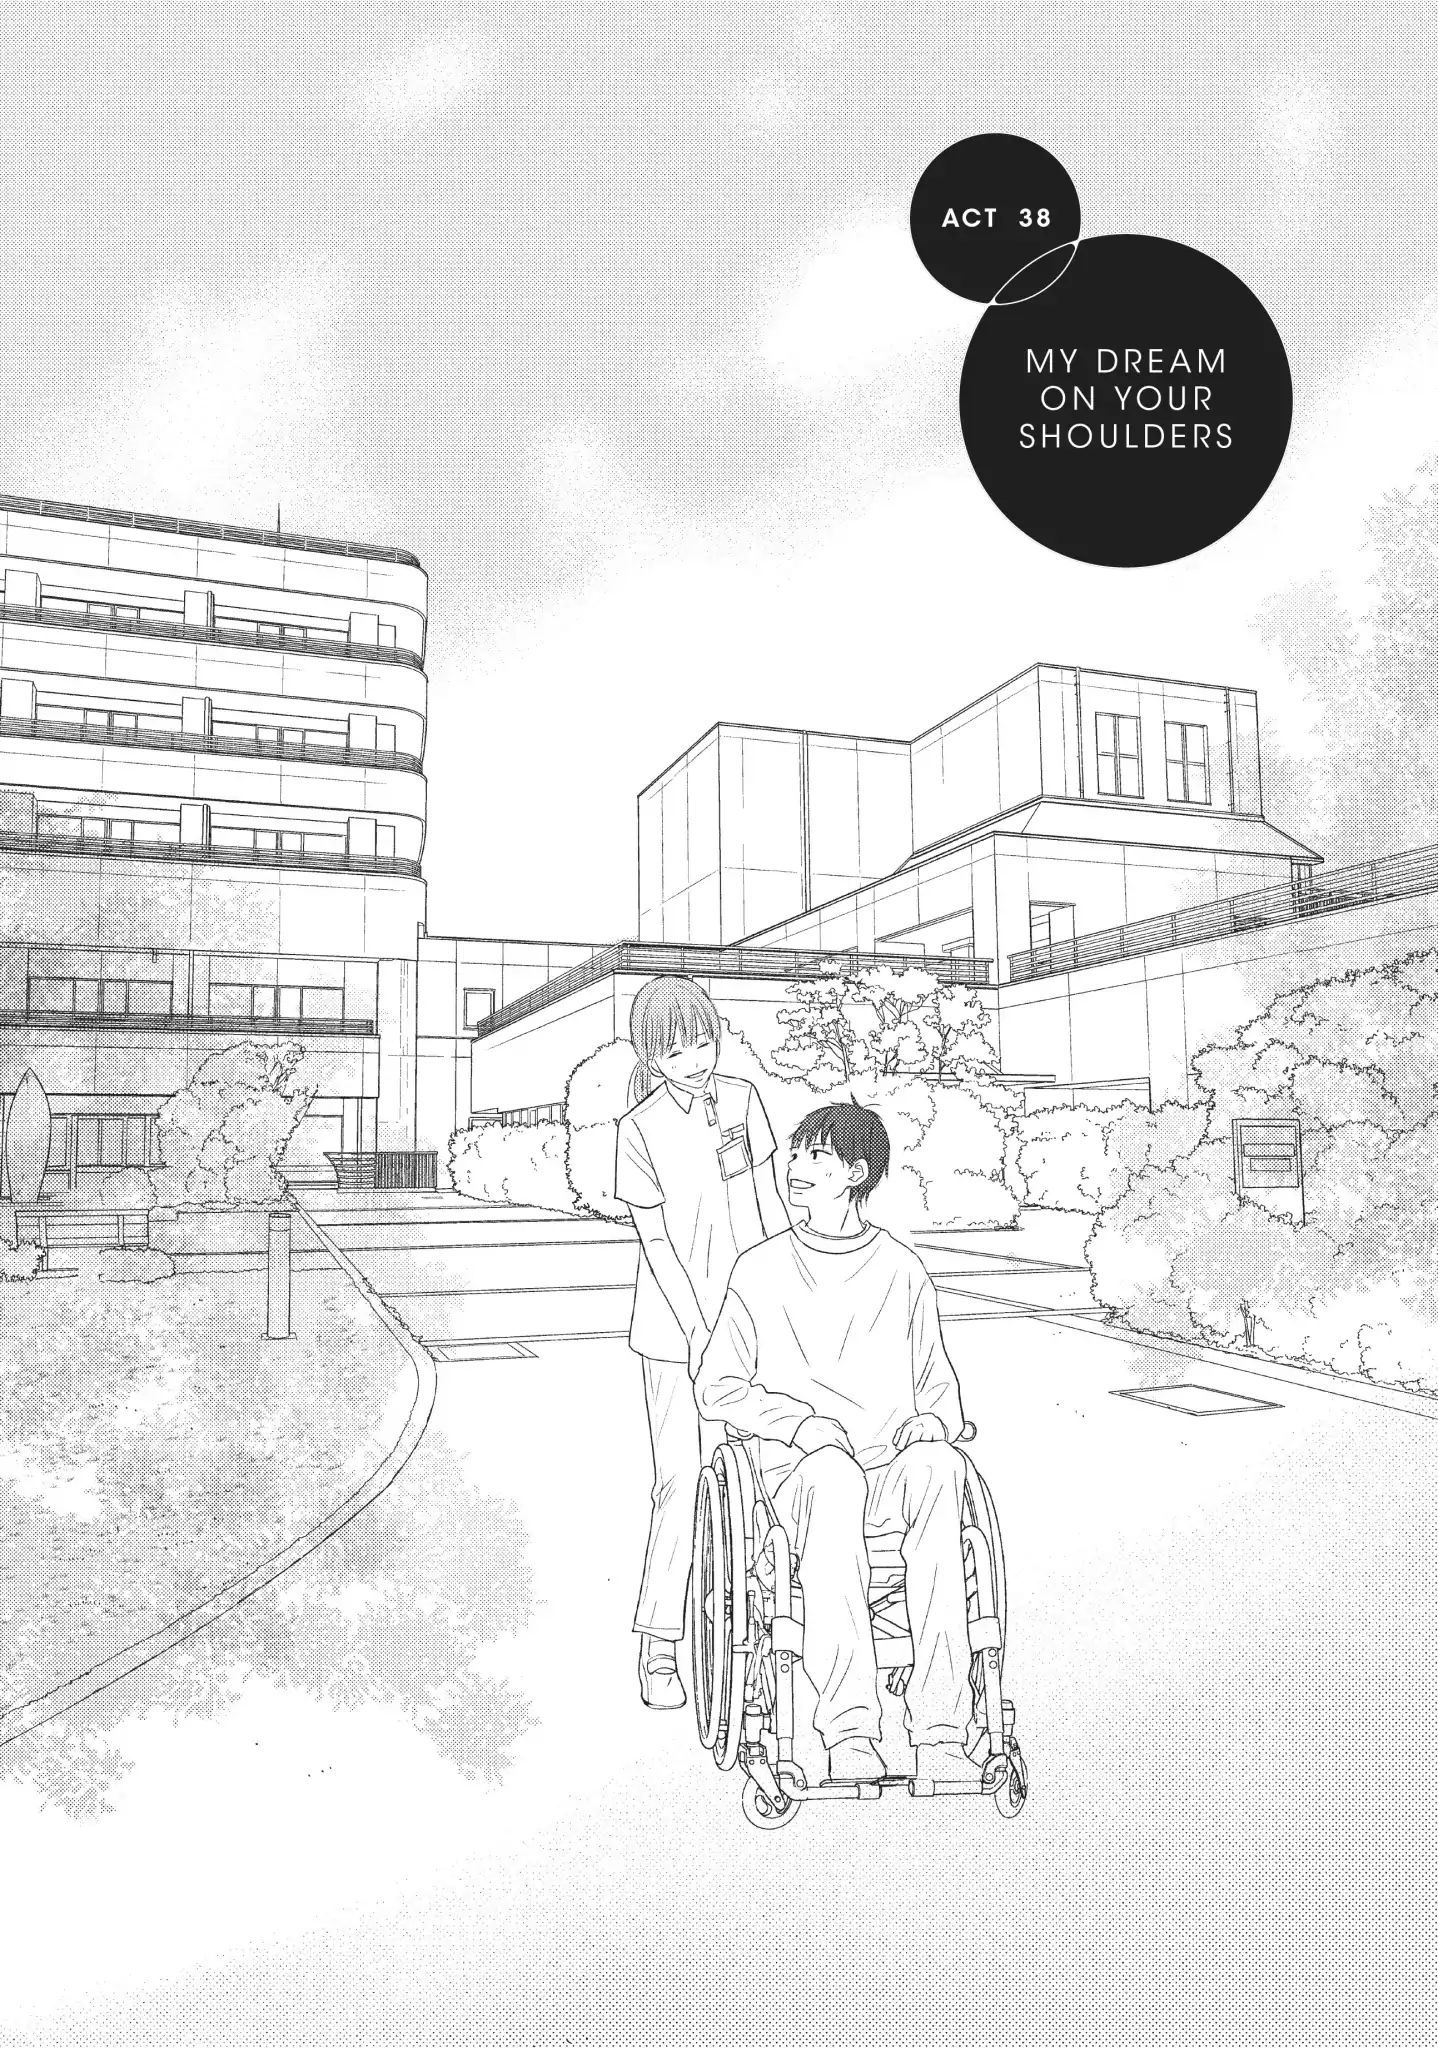 Perfect World (ARUGA Rie) - chapter 38 - #2